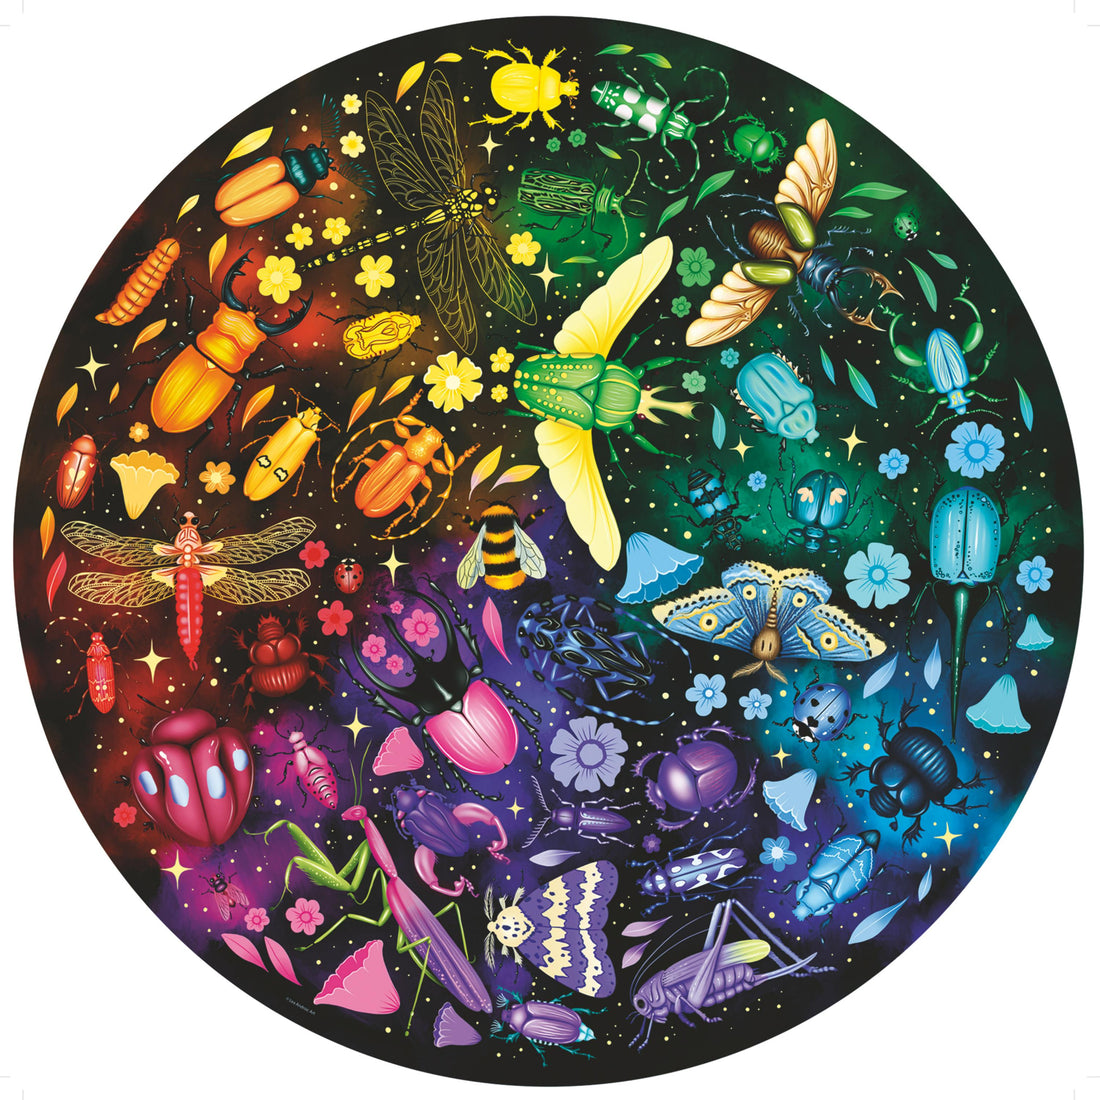 500 Piece Puzzle - Circle of Colors: Insects